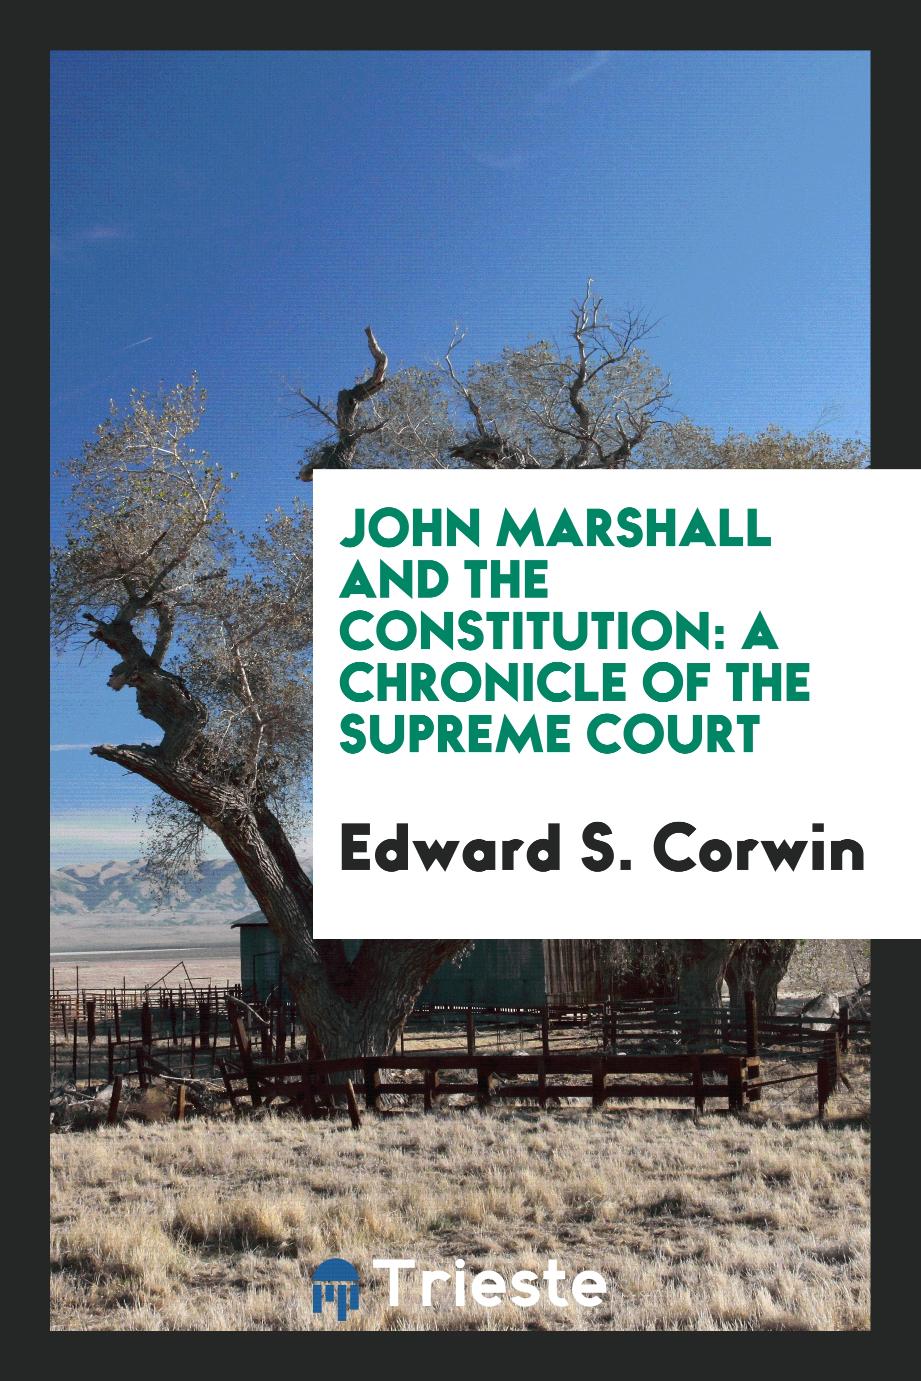 John Marshall and the Constitution: a chronicle of the Supreme Court